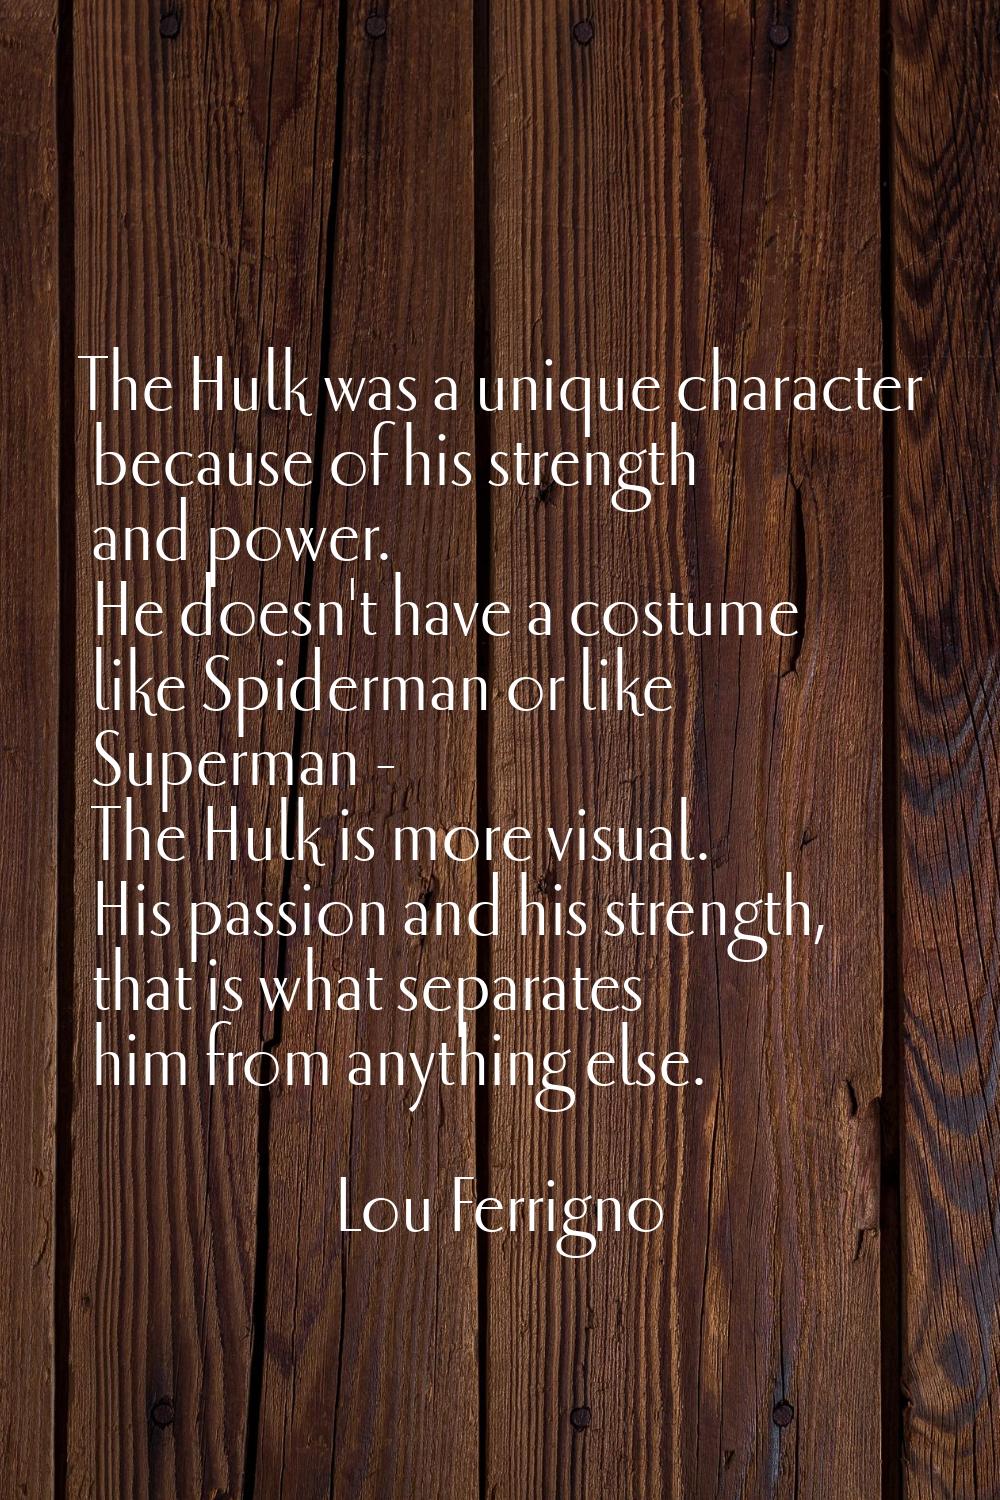 The Hulk was a unique character because of his strength and power. He doesn't have a costume like S